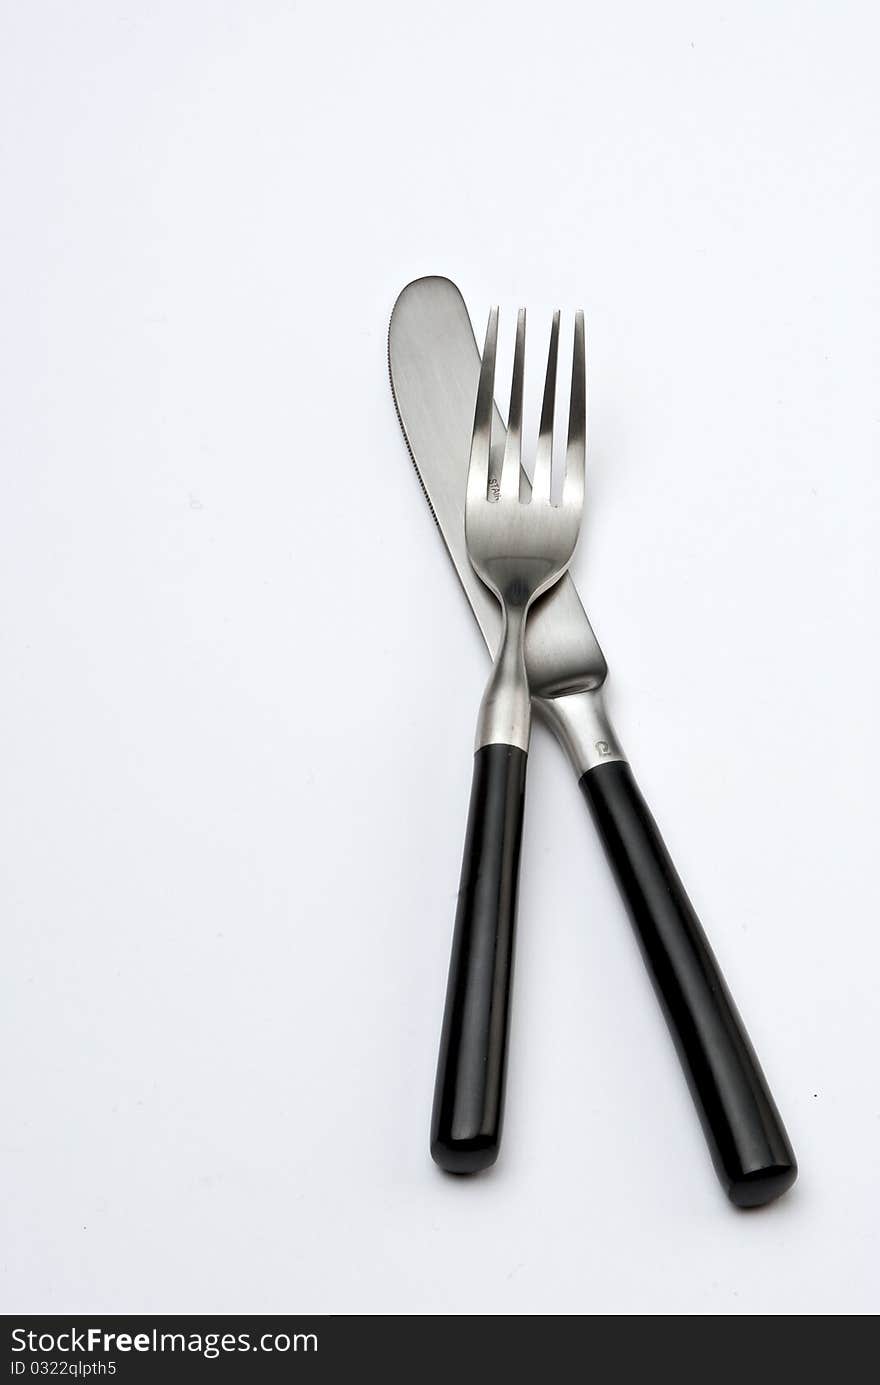 Knife and Fork in Classic design and setup.